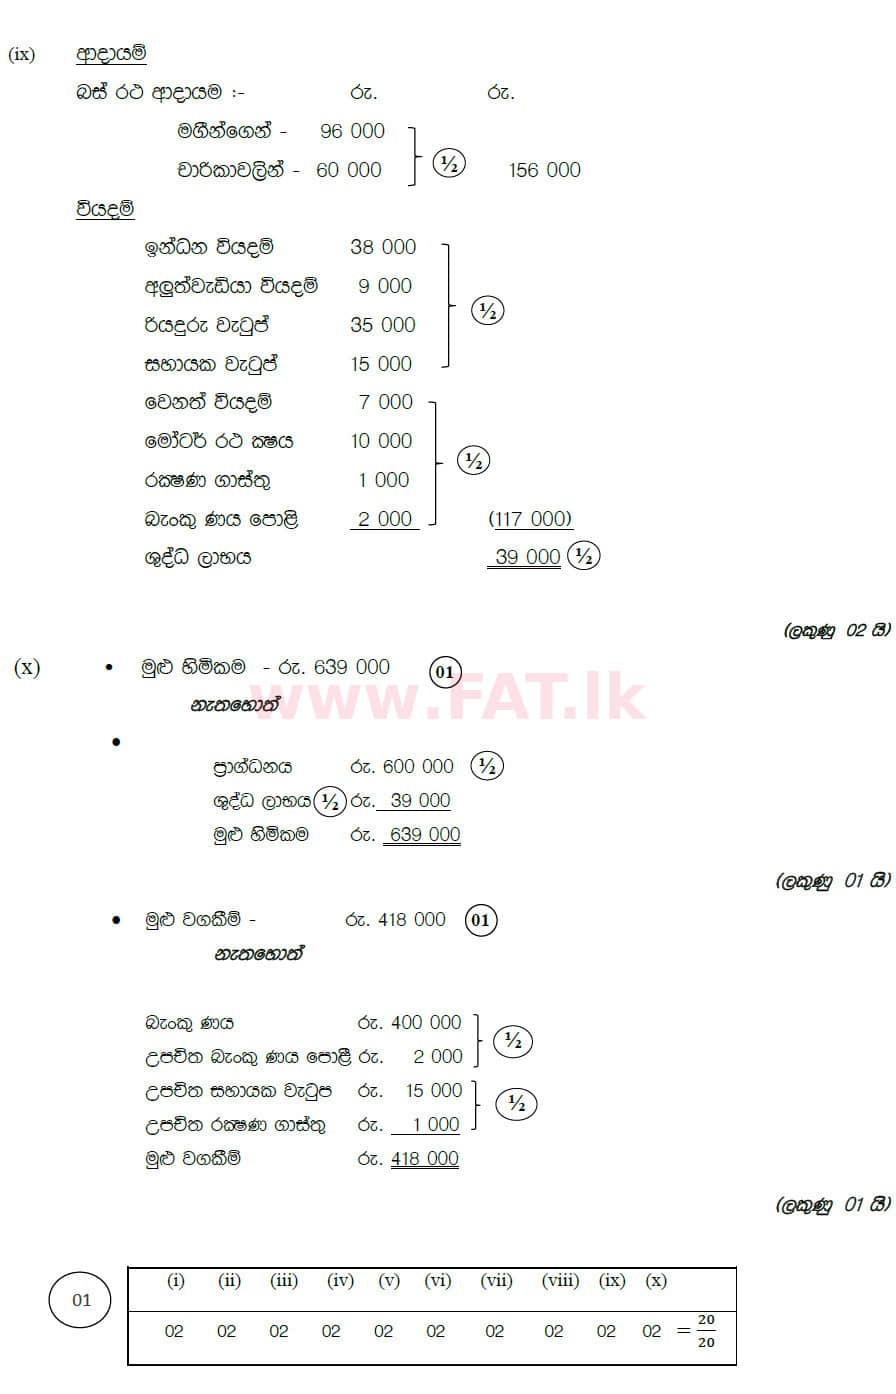 National Syllabus : Ordinary Level (O/L) Business and Accounting Studies - 2019 March - Paper II (සිංහල Medium) 1 5888